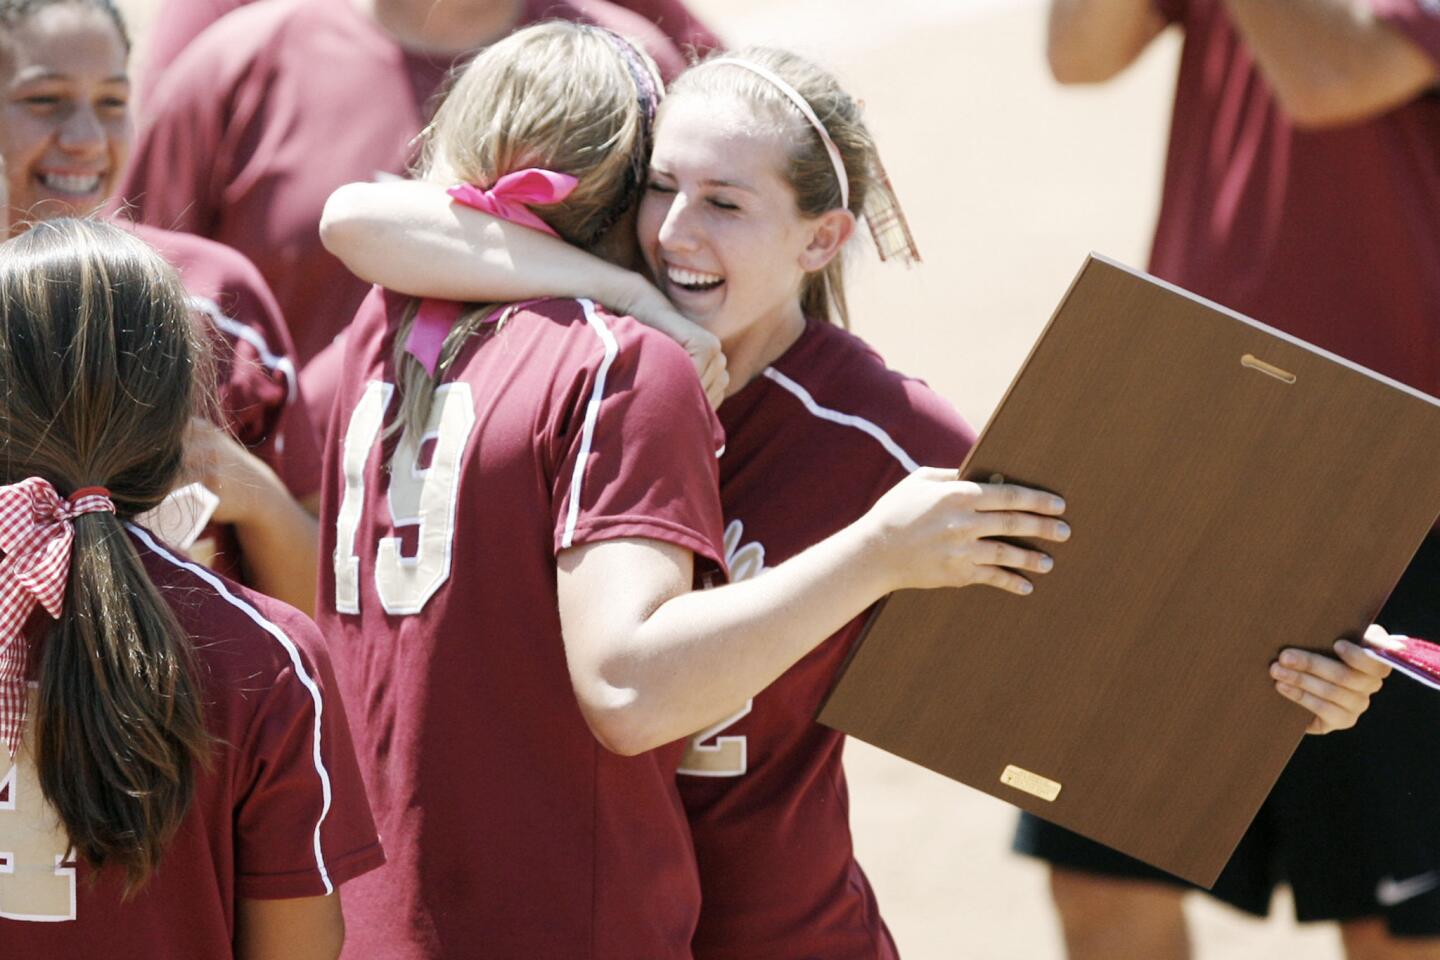 La Canada's Lauren Cox, left, and Catherin Homer, embrace each other after winning the CIF Southern Section Division V championship game against Beumont, which took place at Deanna Manning Stadium in Irvine on Saturday, June 2, 2012.